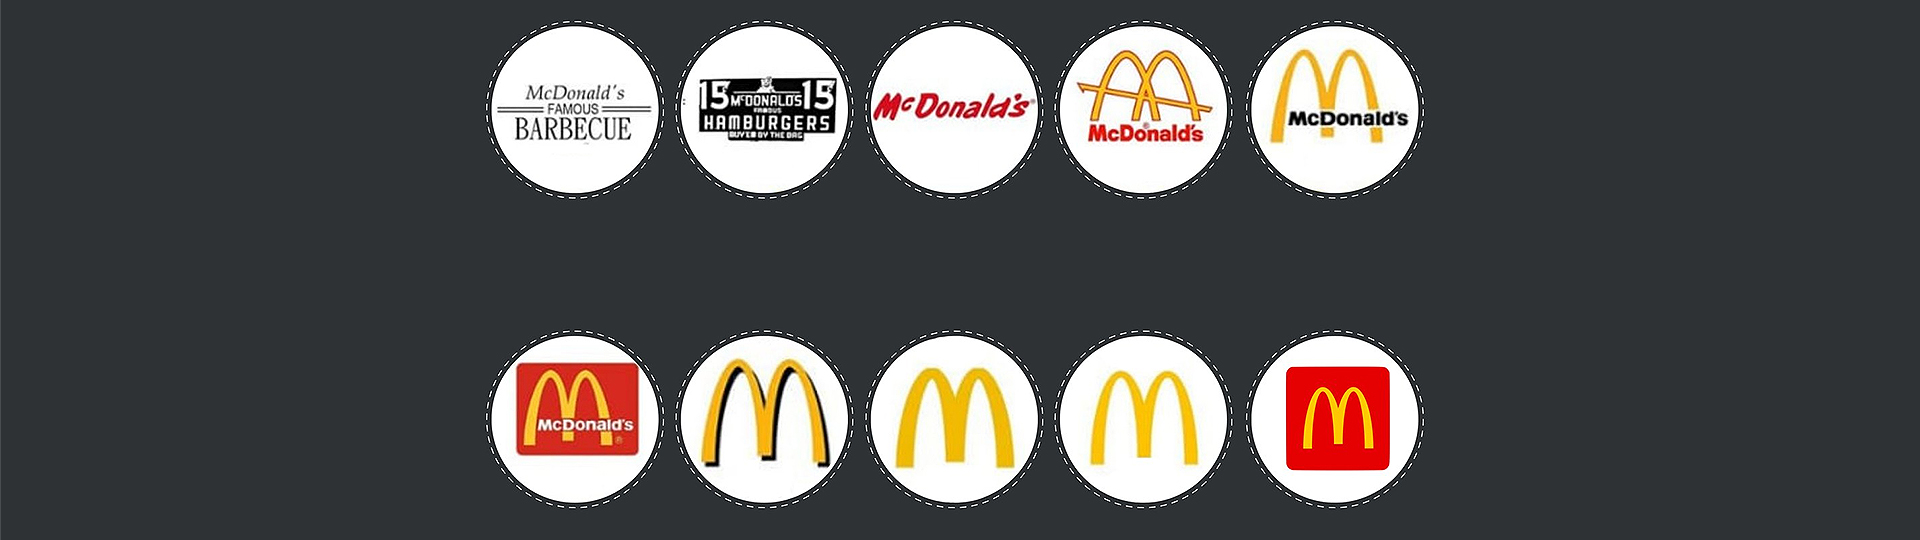 McDonald Logo History | Meaning, & Evolution of Golden Arches